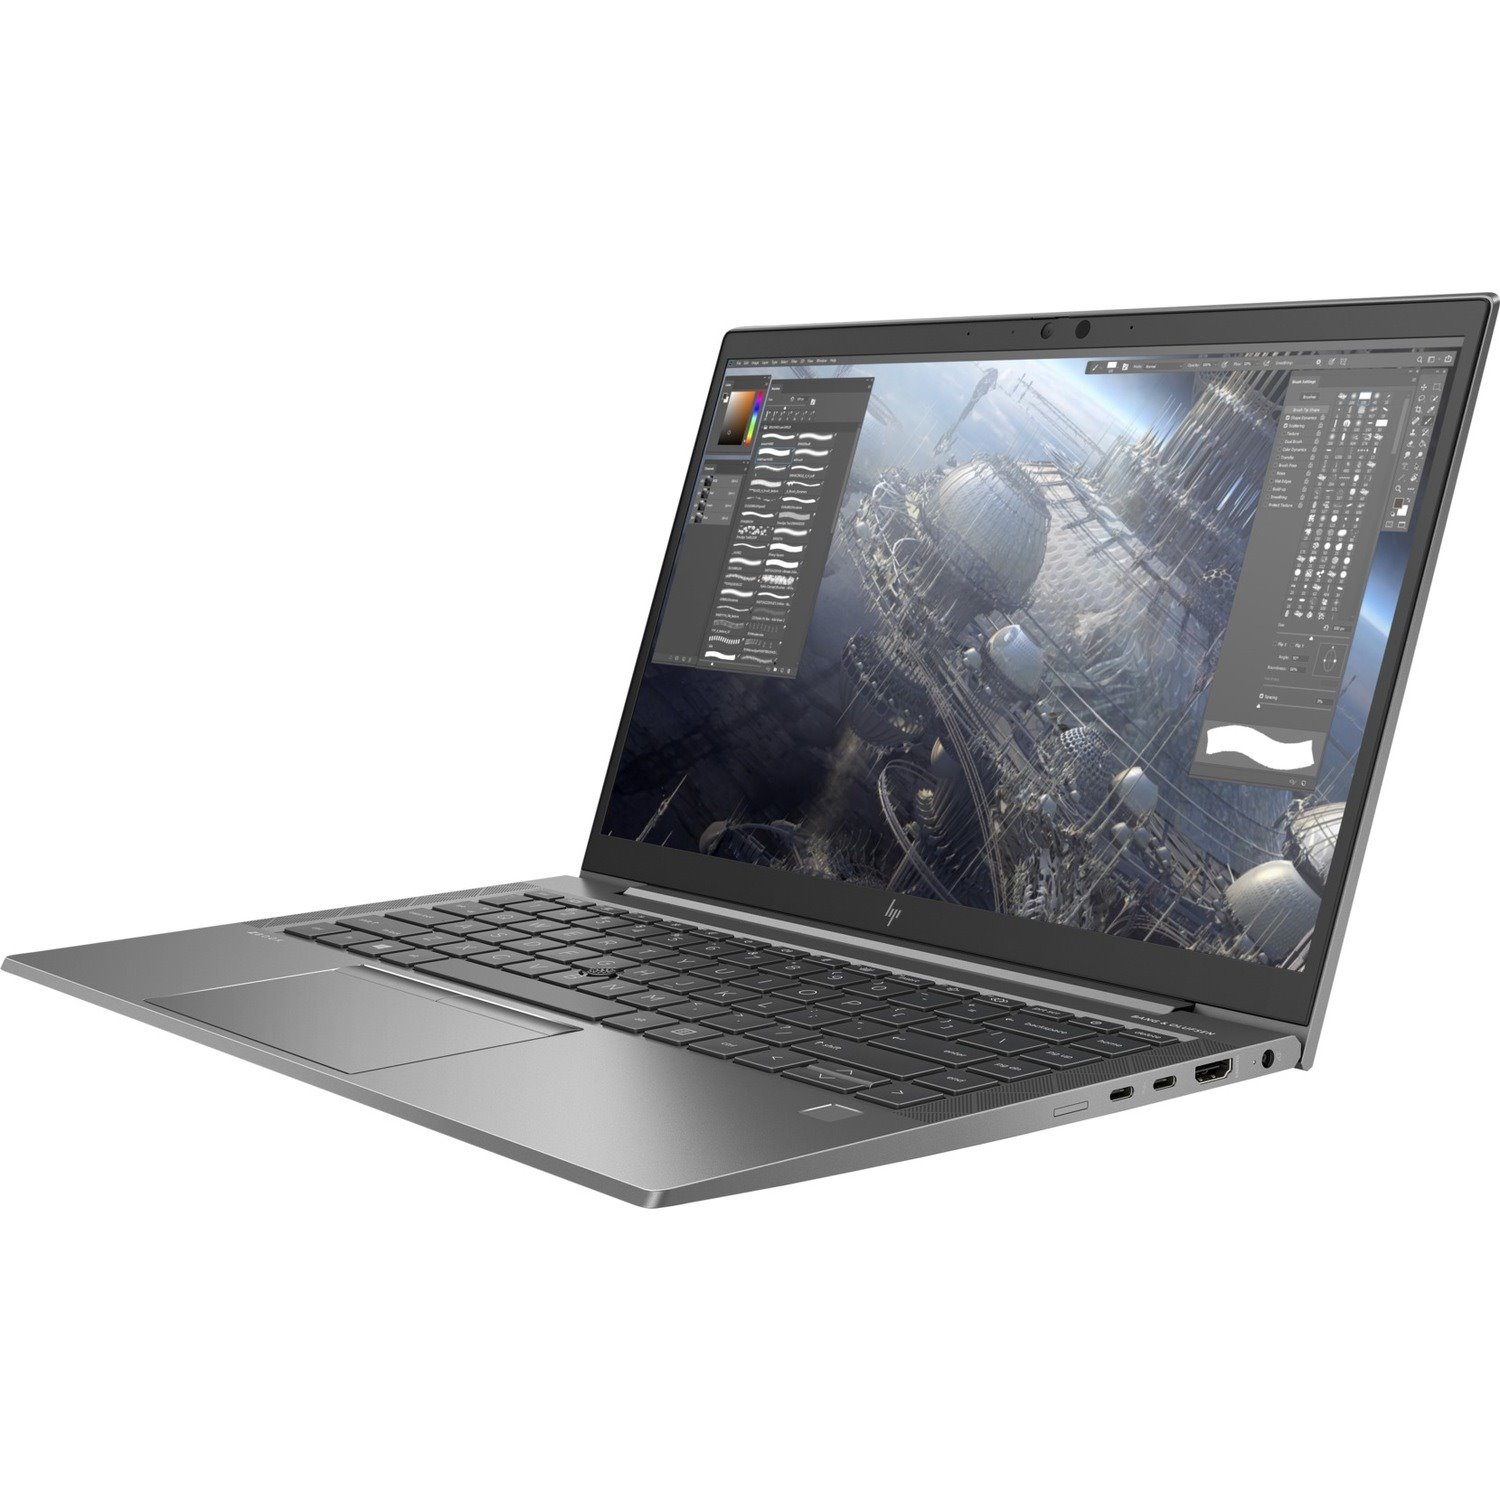 HP ZBook Firefly 14 G8 35.6 cm (14") Mobile Workstation - Full HD - 1920 x 1080 - Intel Core i7 11th Gen i7-1165G7 Quad-core (4 Core) 2.80 GHz - 16 GB Total RAM - 512 GB SSD